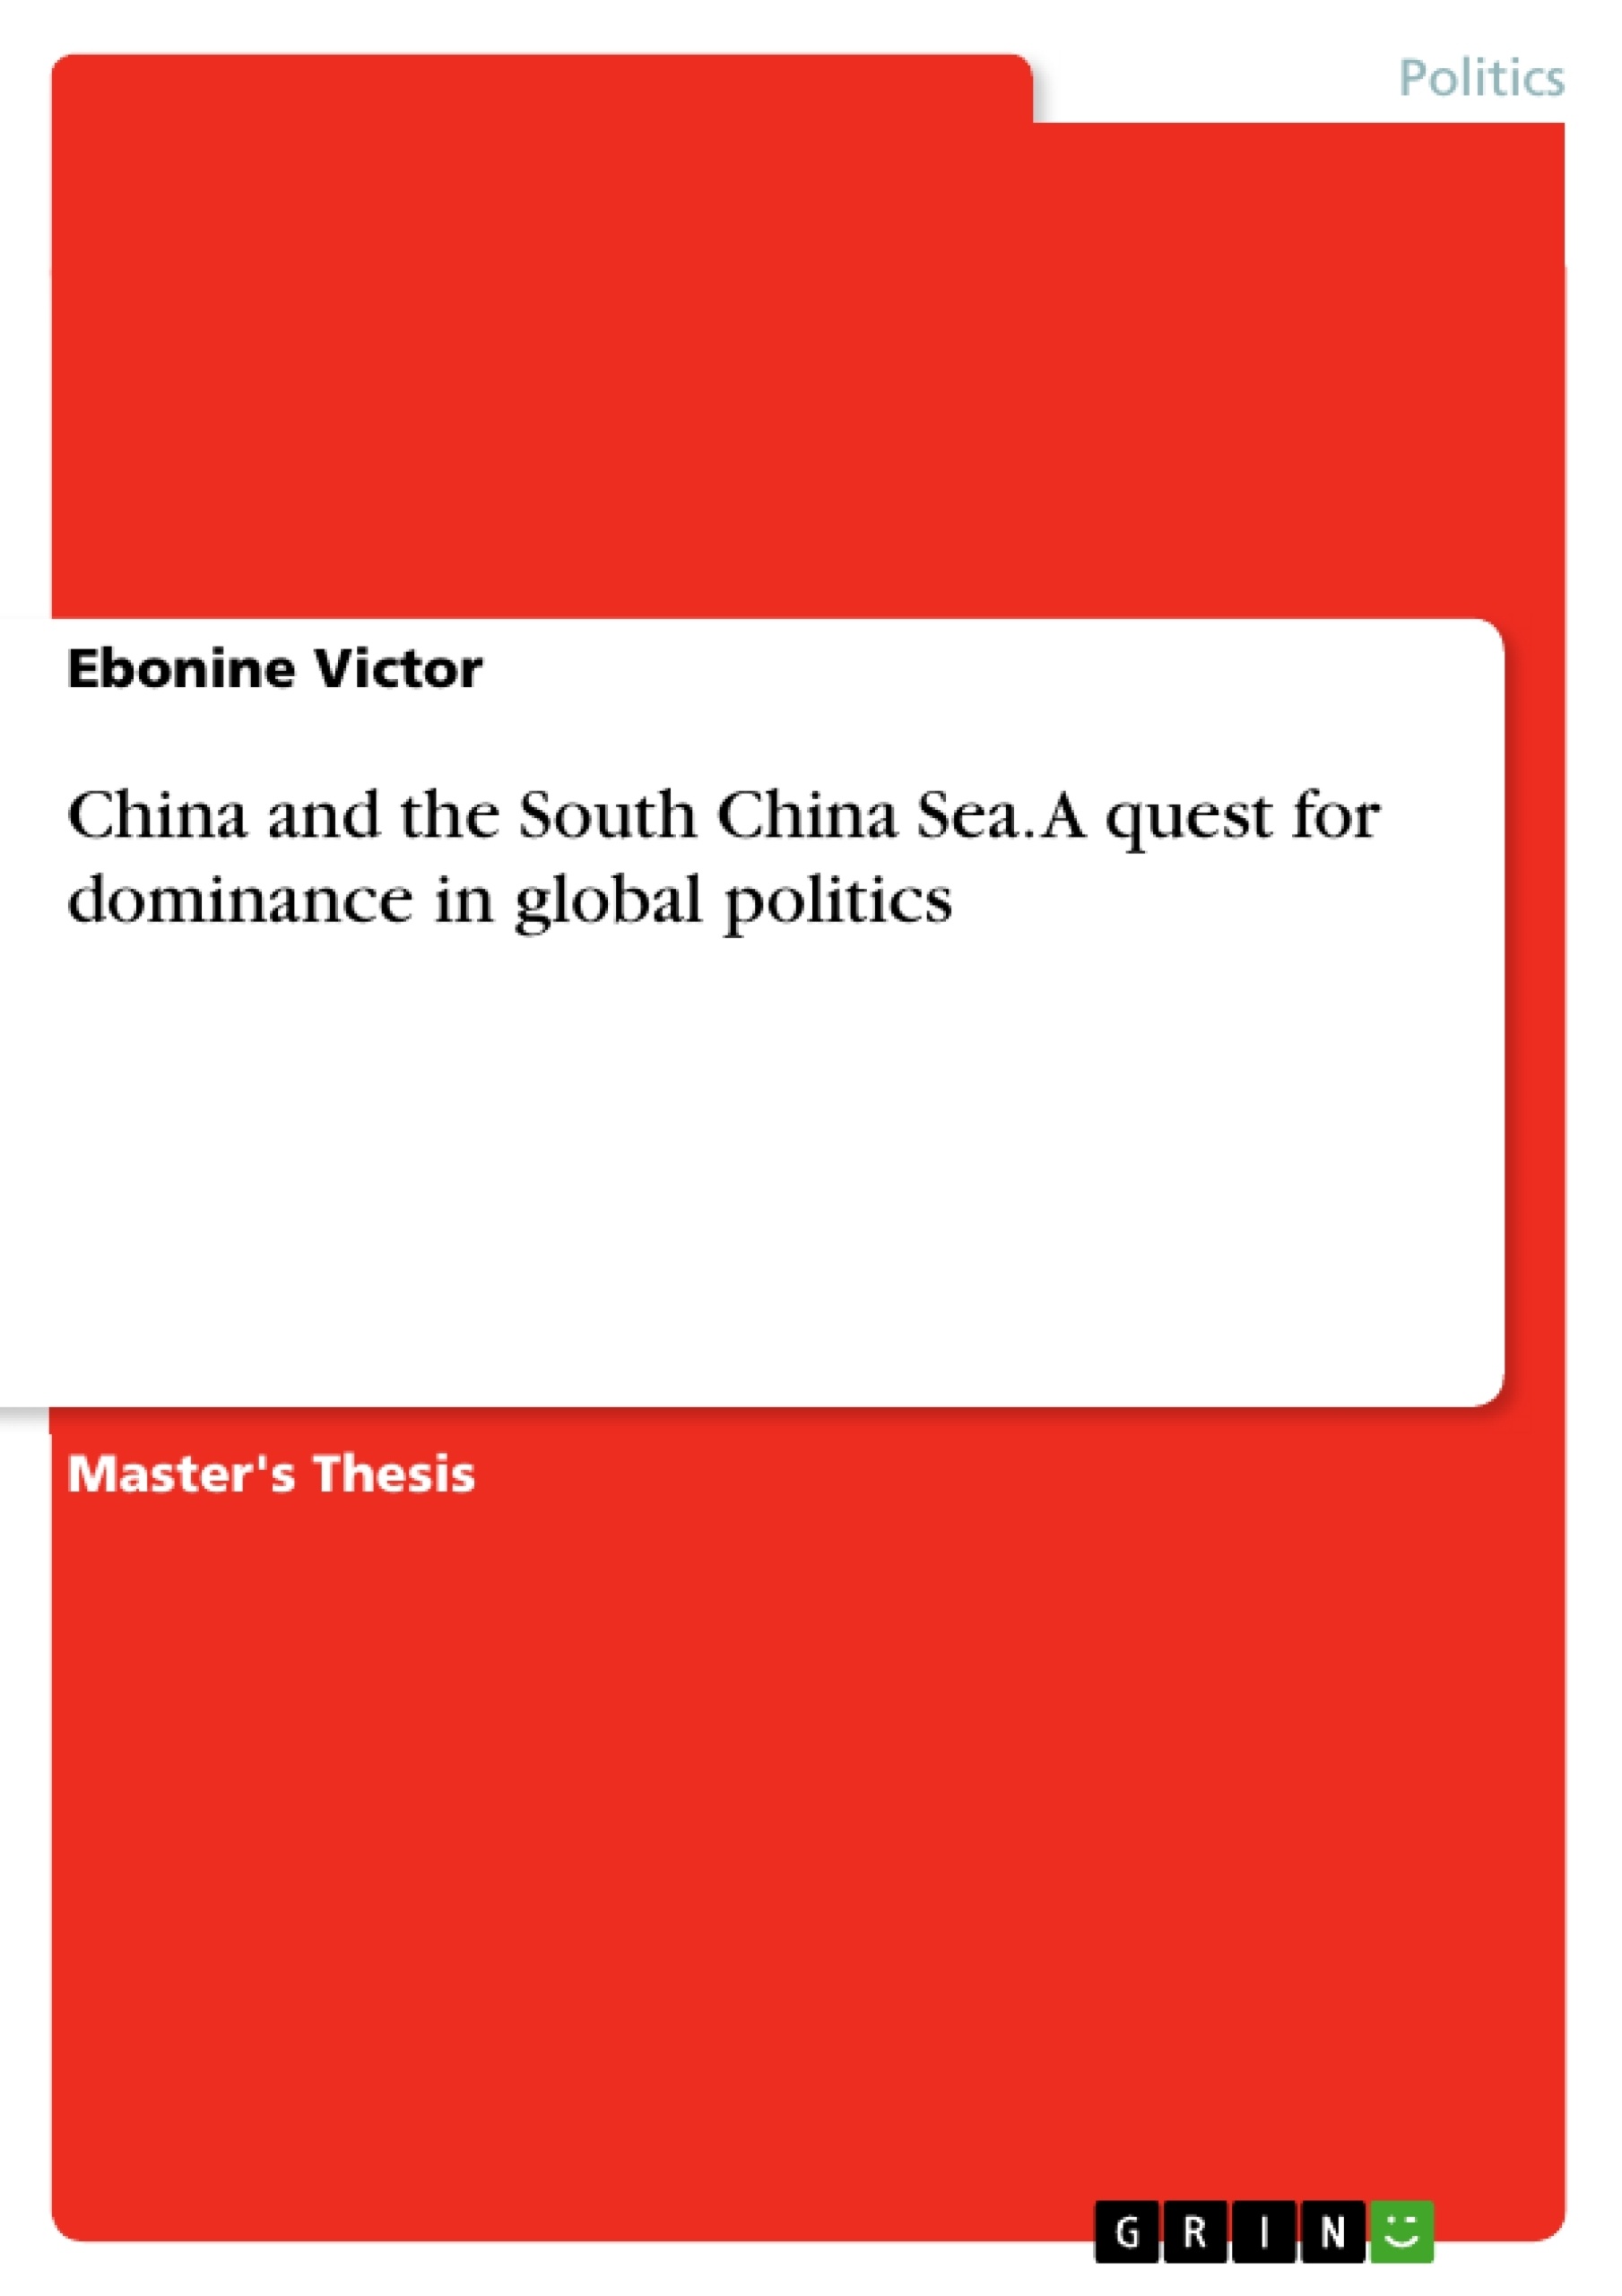 Titel: China and the South China Sea. A quest for dominance in global politics